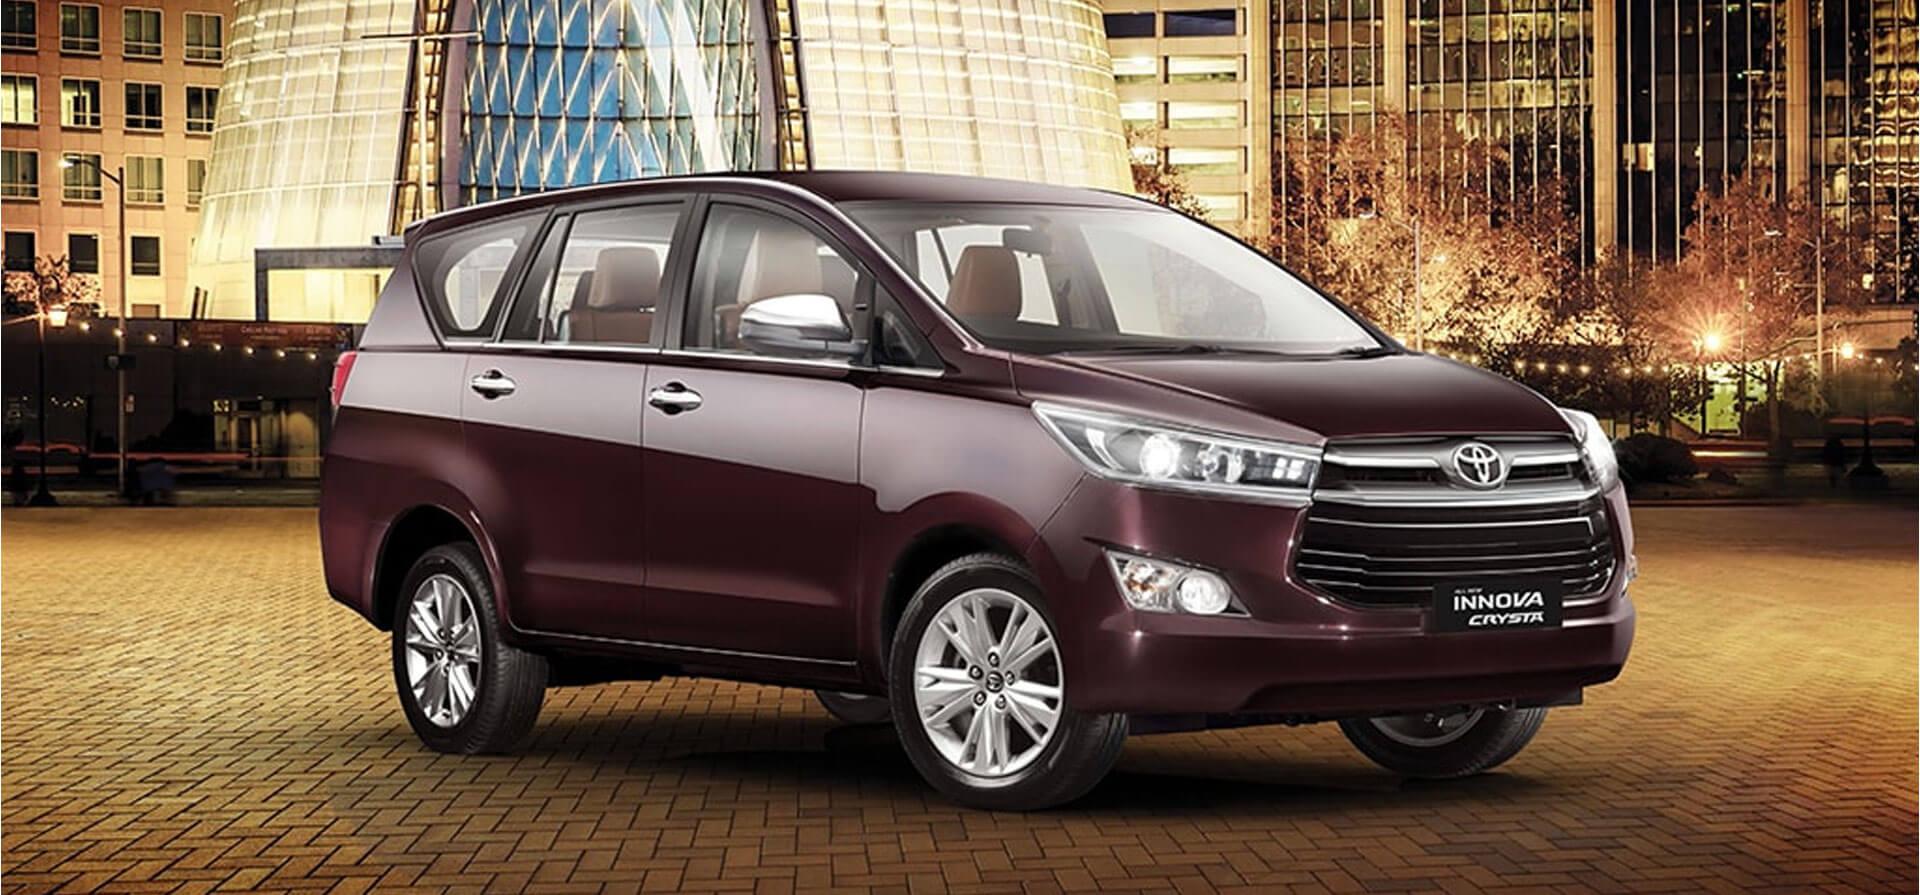 Toyota Innova Crysta Touring Sport Price, Launch, Features